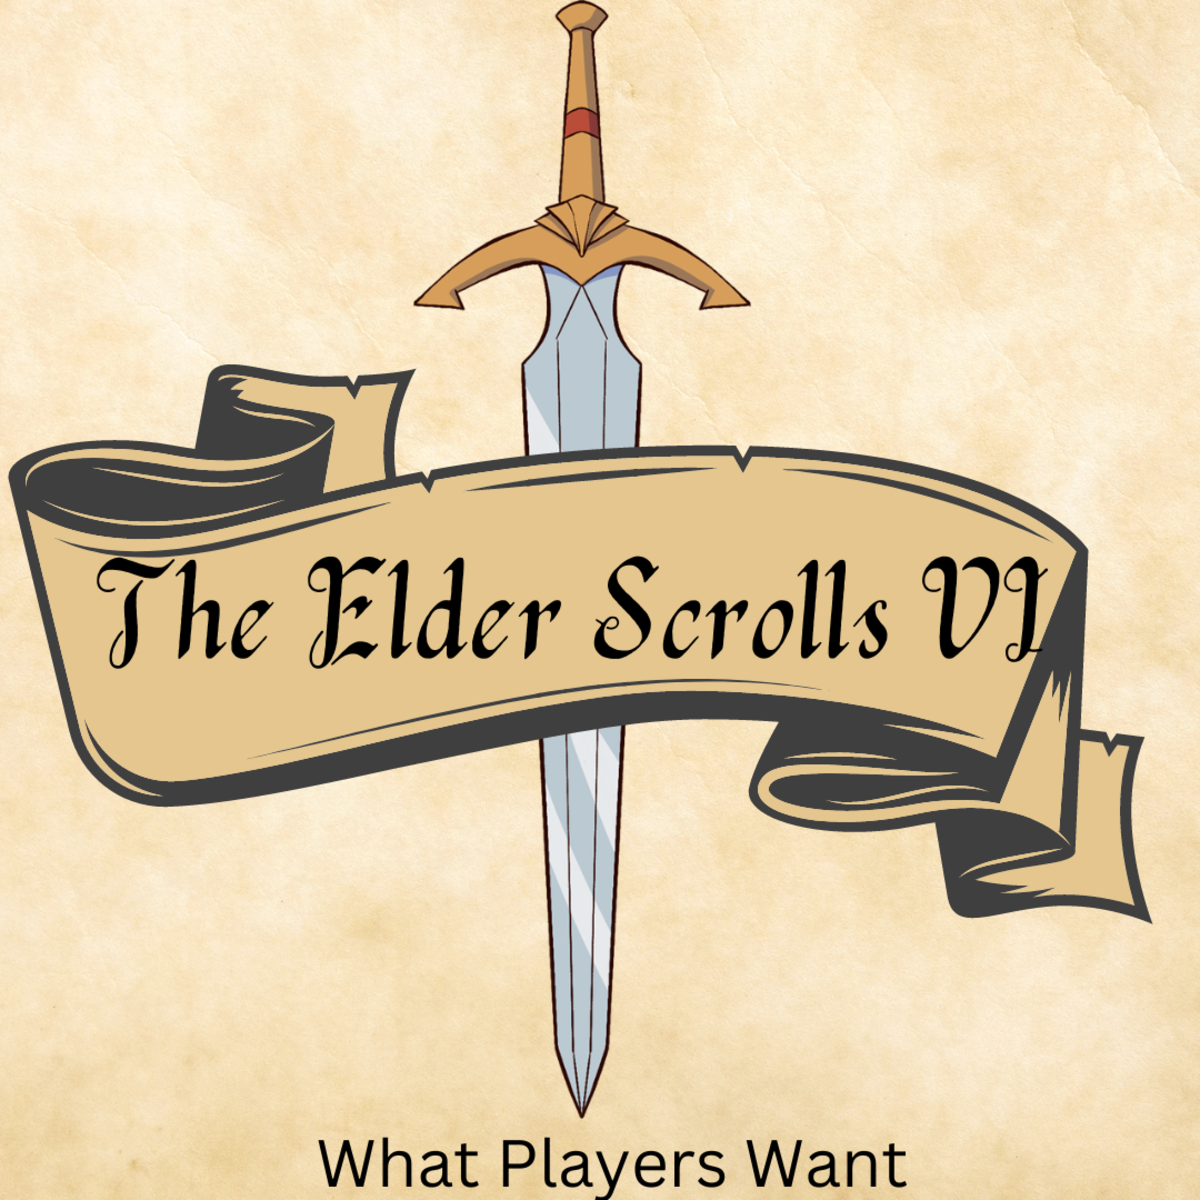 12 Things Players Want to See in “The Elder Scrolls VI”